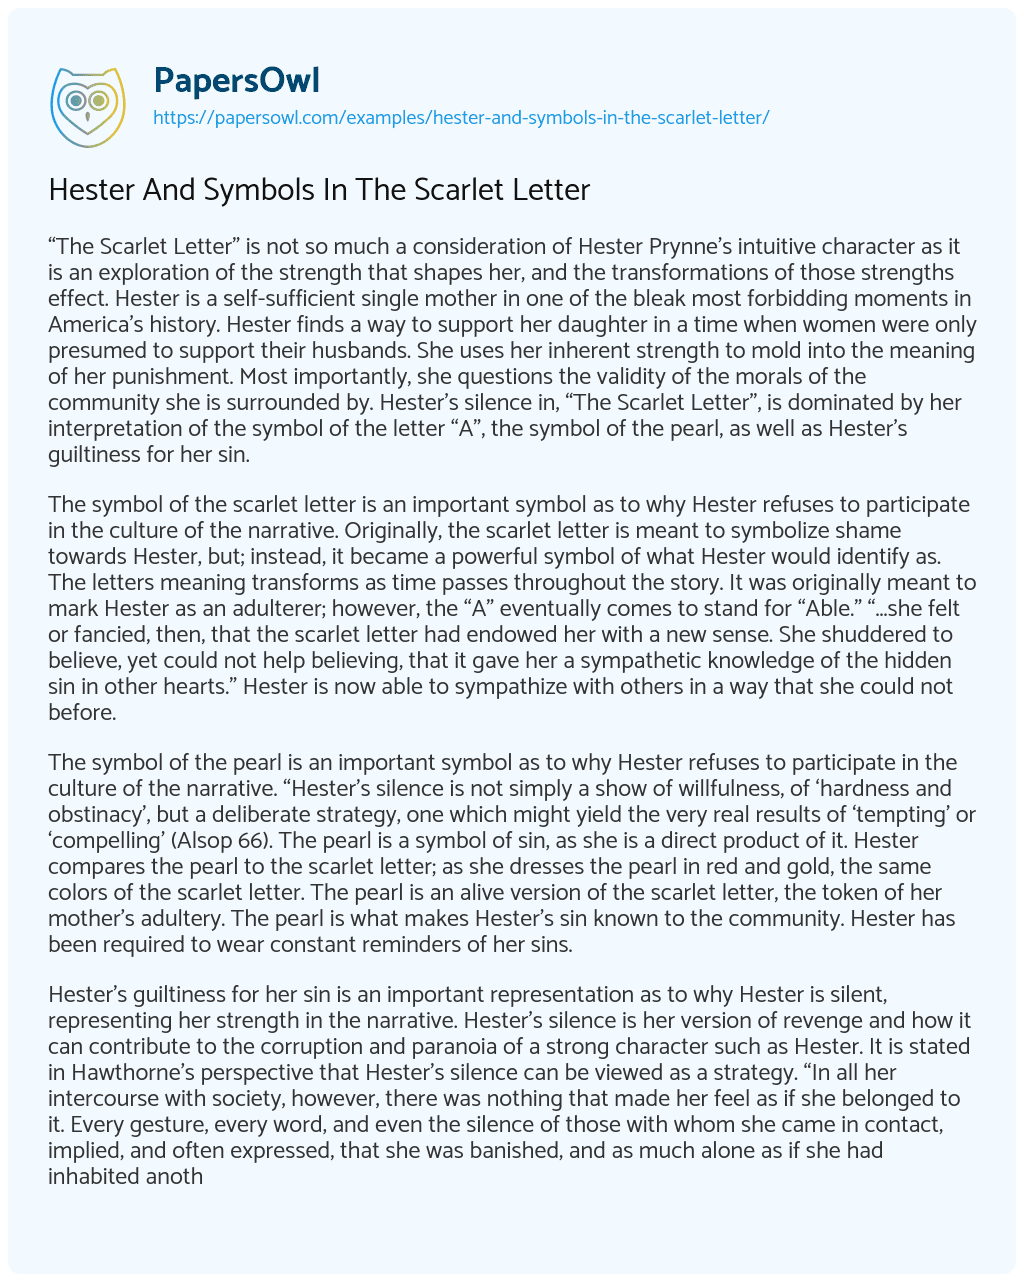 Essay on Hester and Symbols in the Scarlet Letter